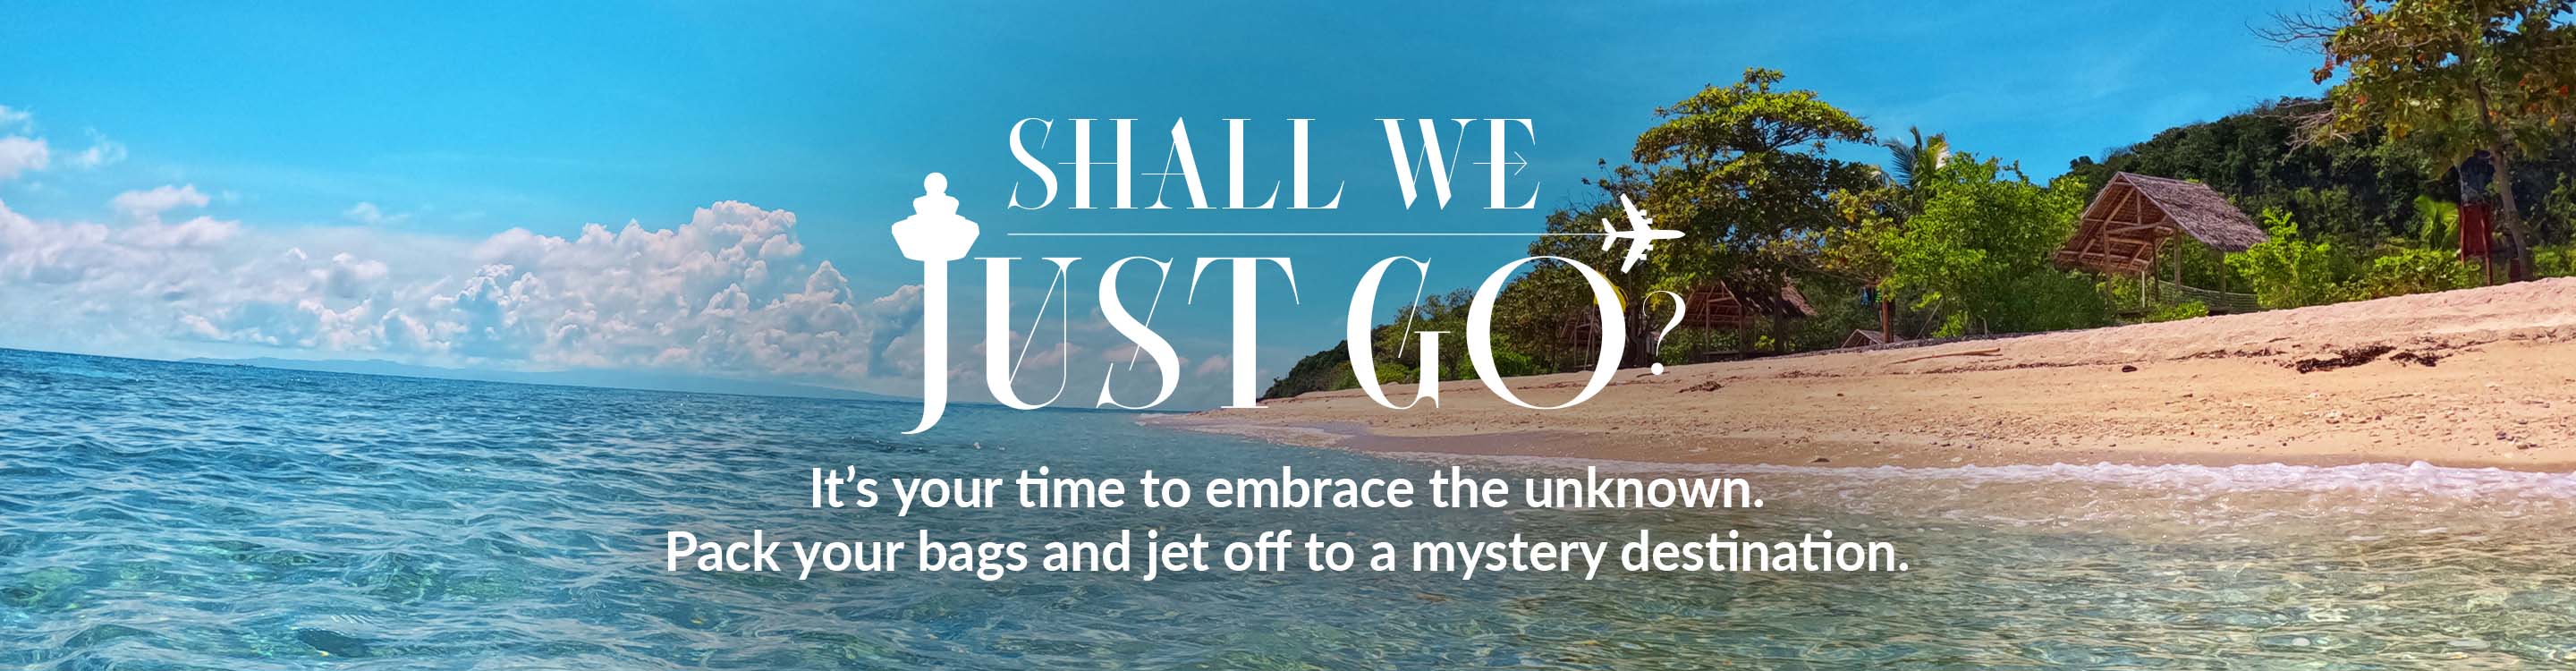 Shall We Just Go? It's your time to embrace the unknown. Pack your bags and jet off to a mystery destination.